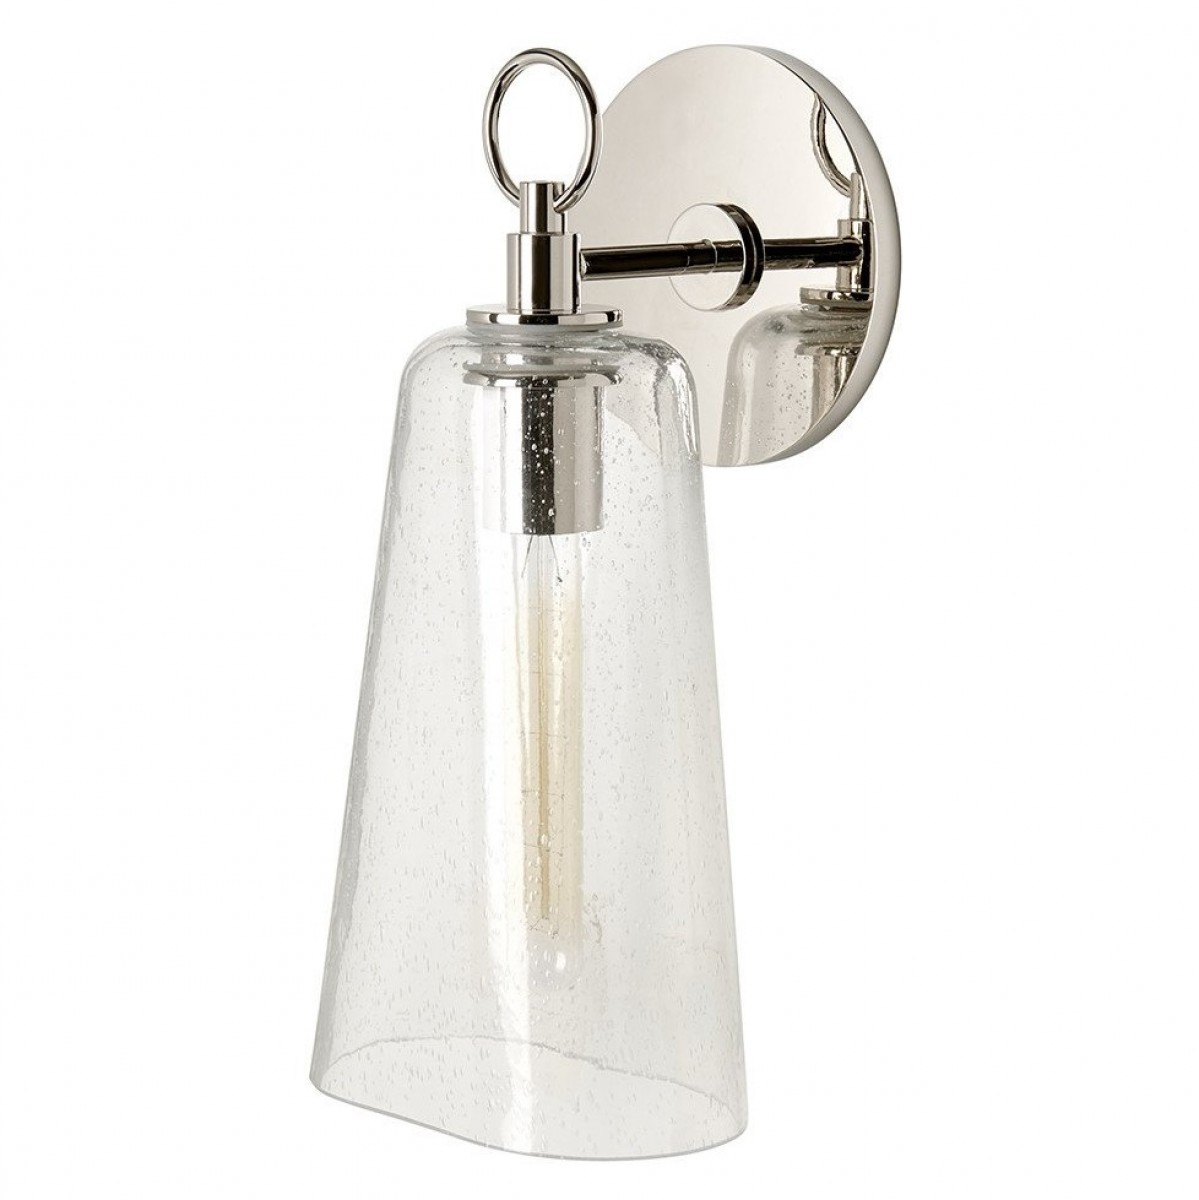 Arundel Wall Mounted Single Arm Sconce with Glass Shade